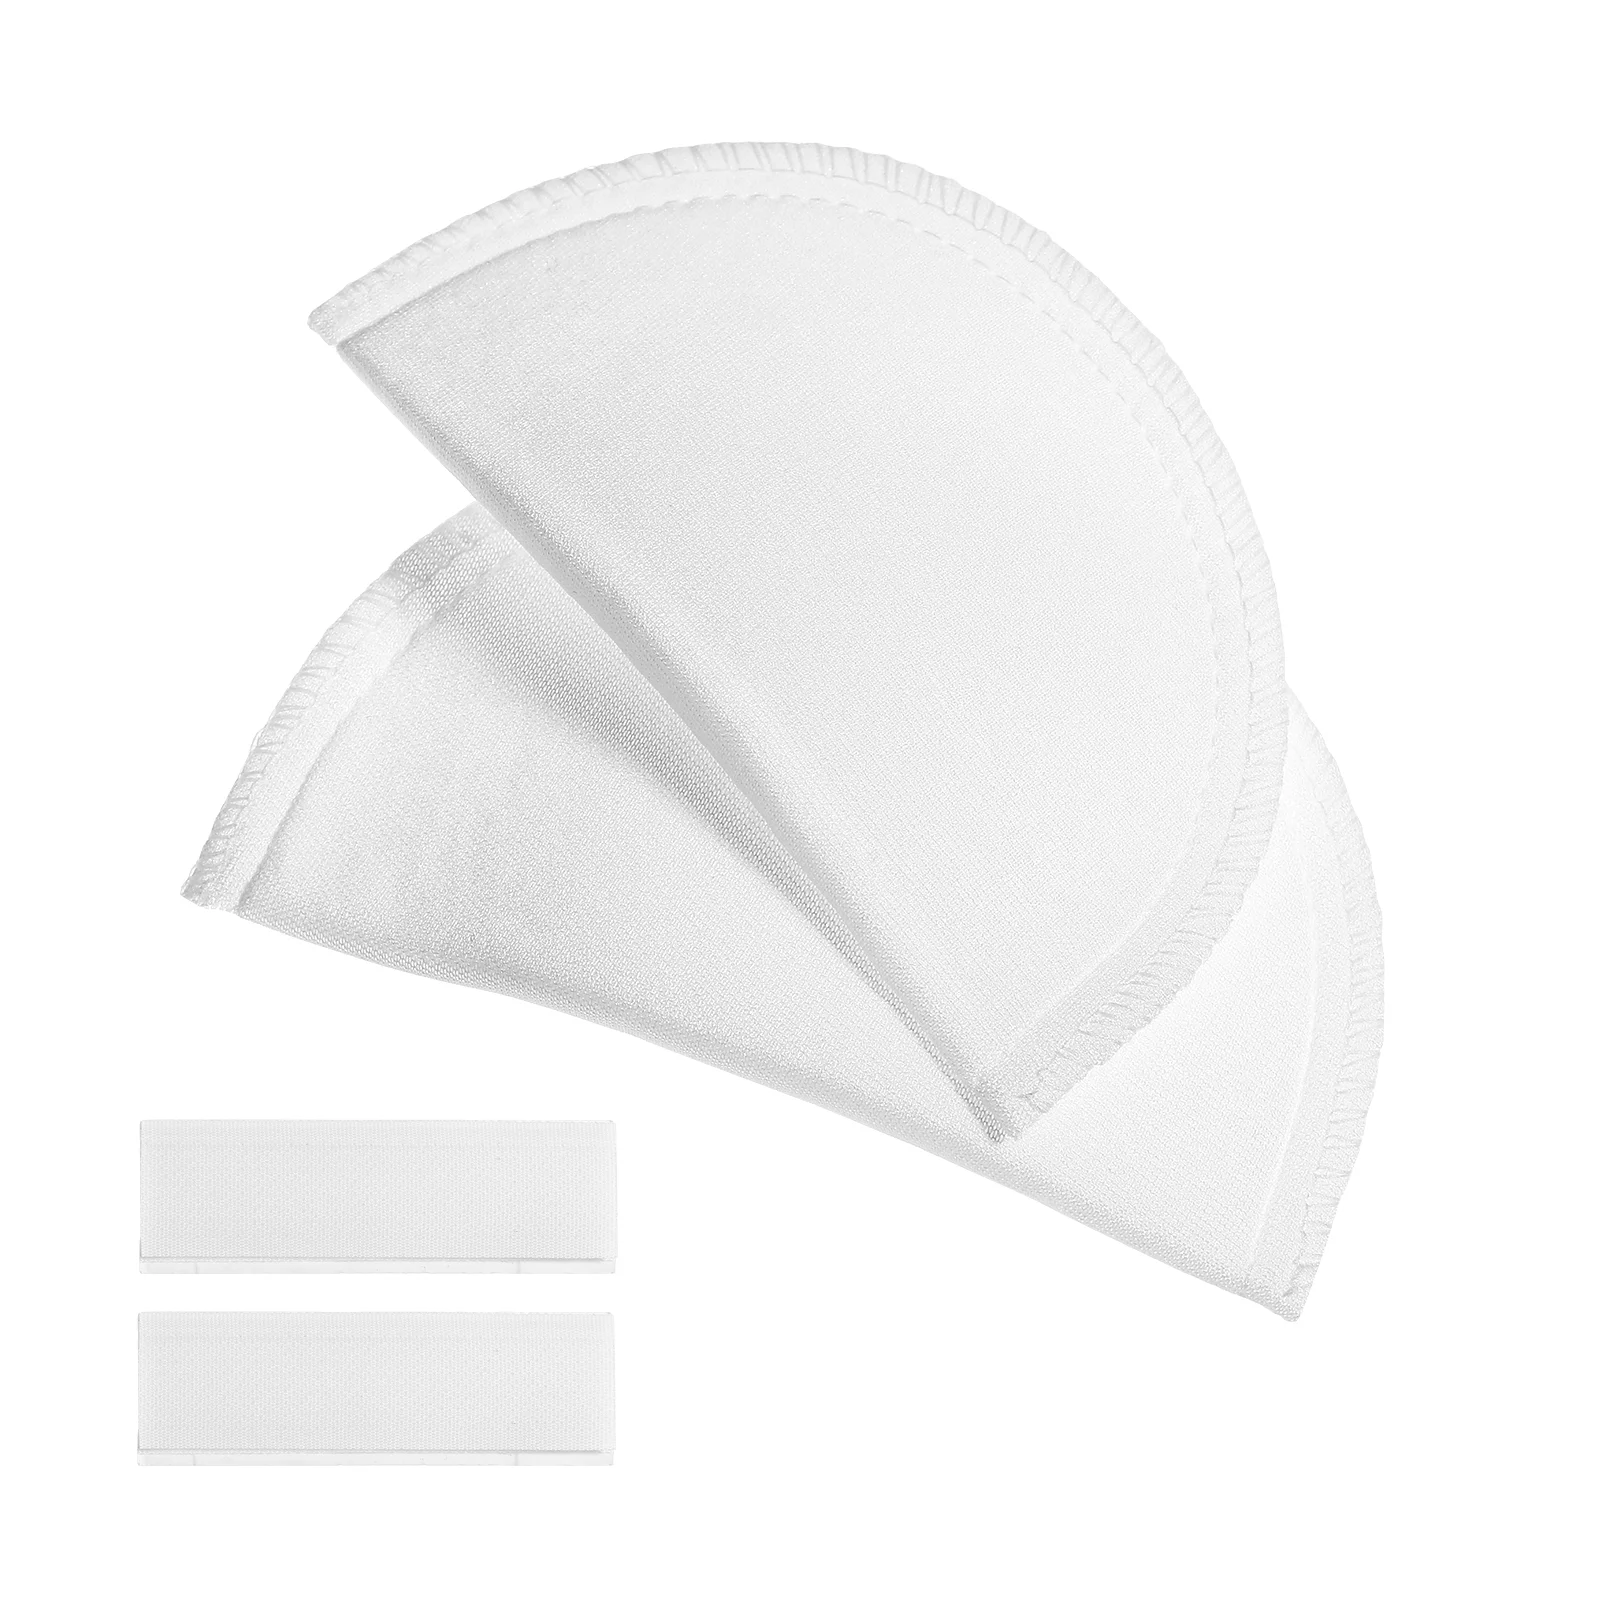 

Shoulder Pads Padwomenenhancer Clothes Clothing Suit Adhesive Sewingpushaccessories White Siliconeshirt Strap Girl Men Thin